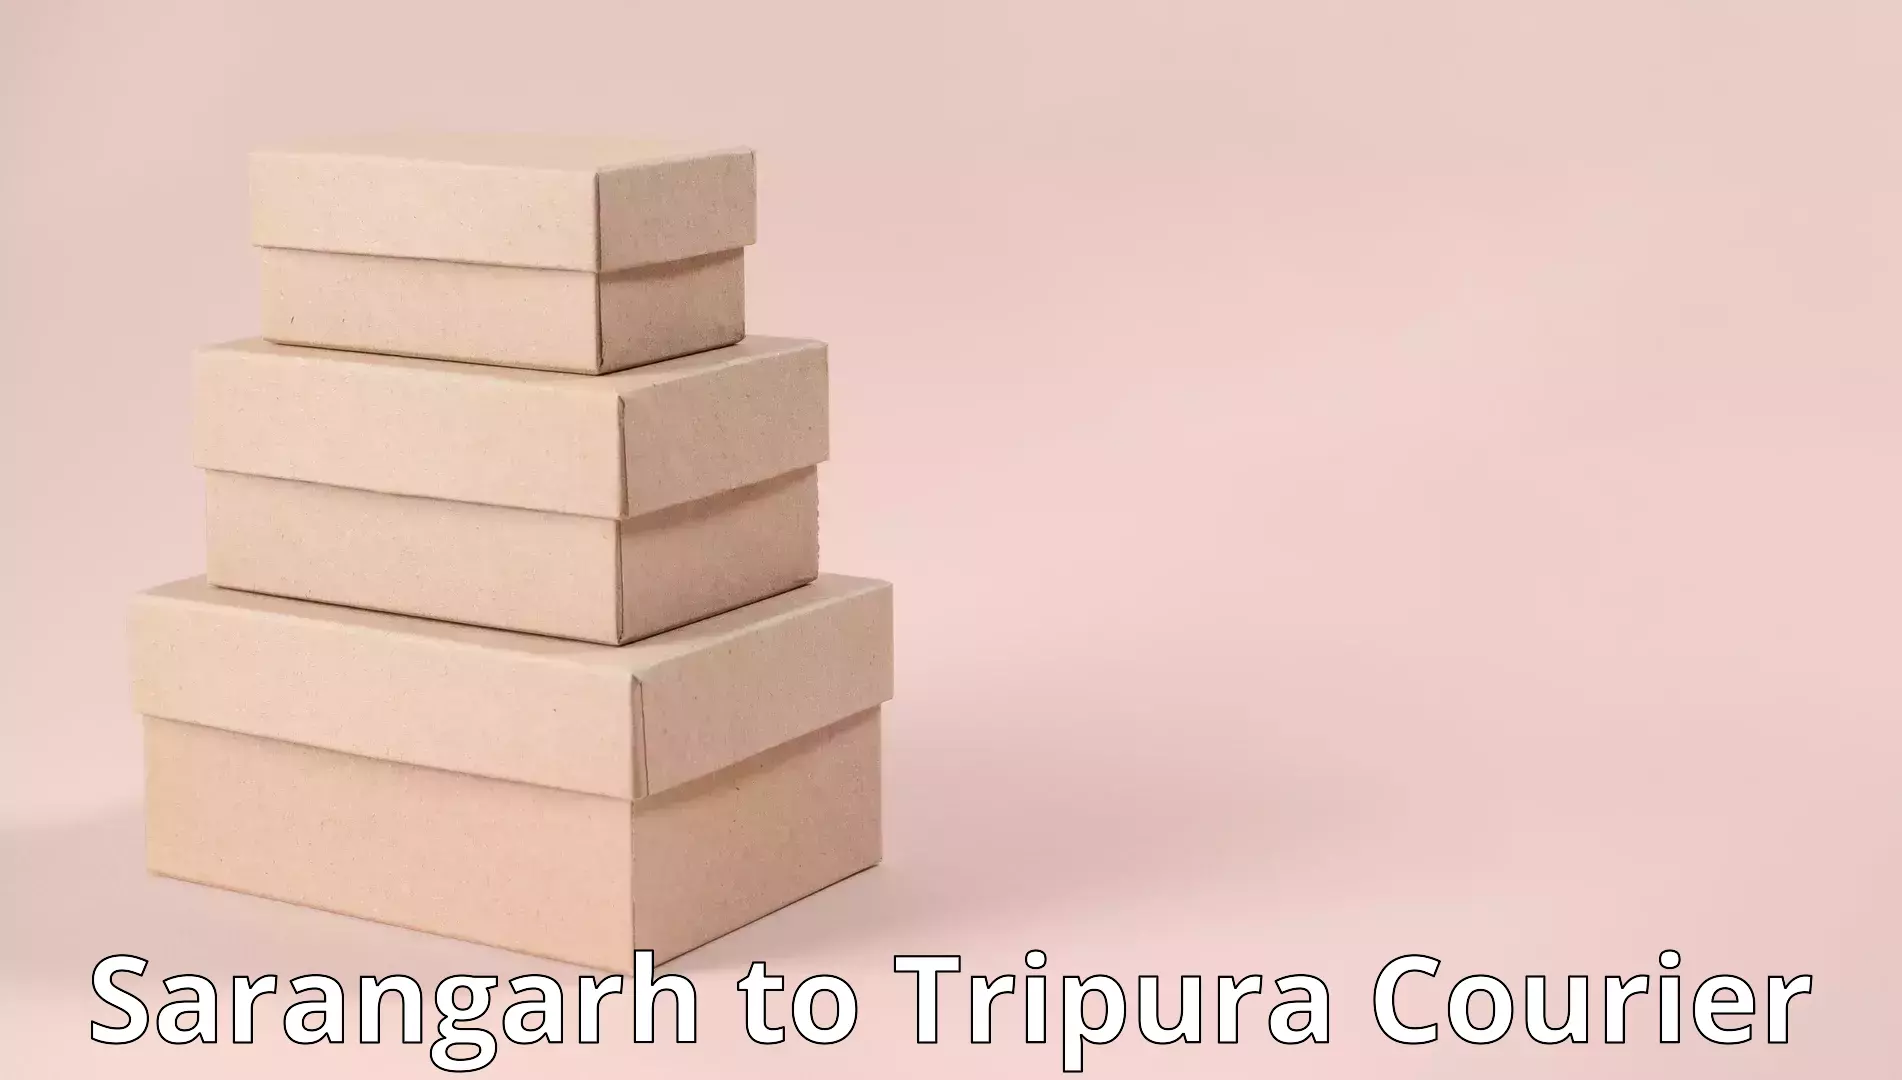 Professional packing services in Sarangarh to Tripura